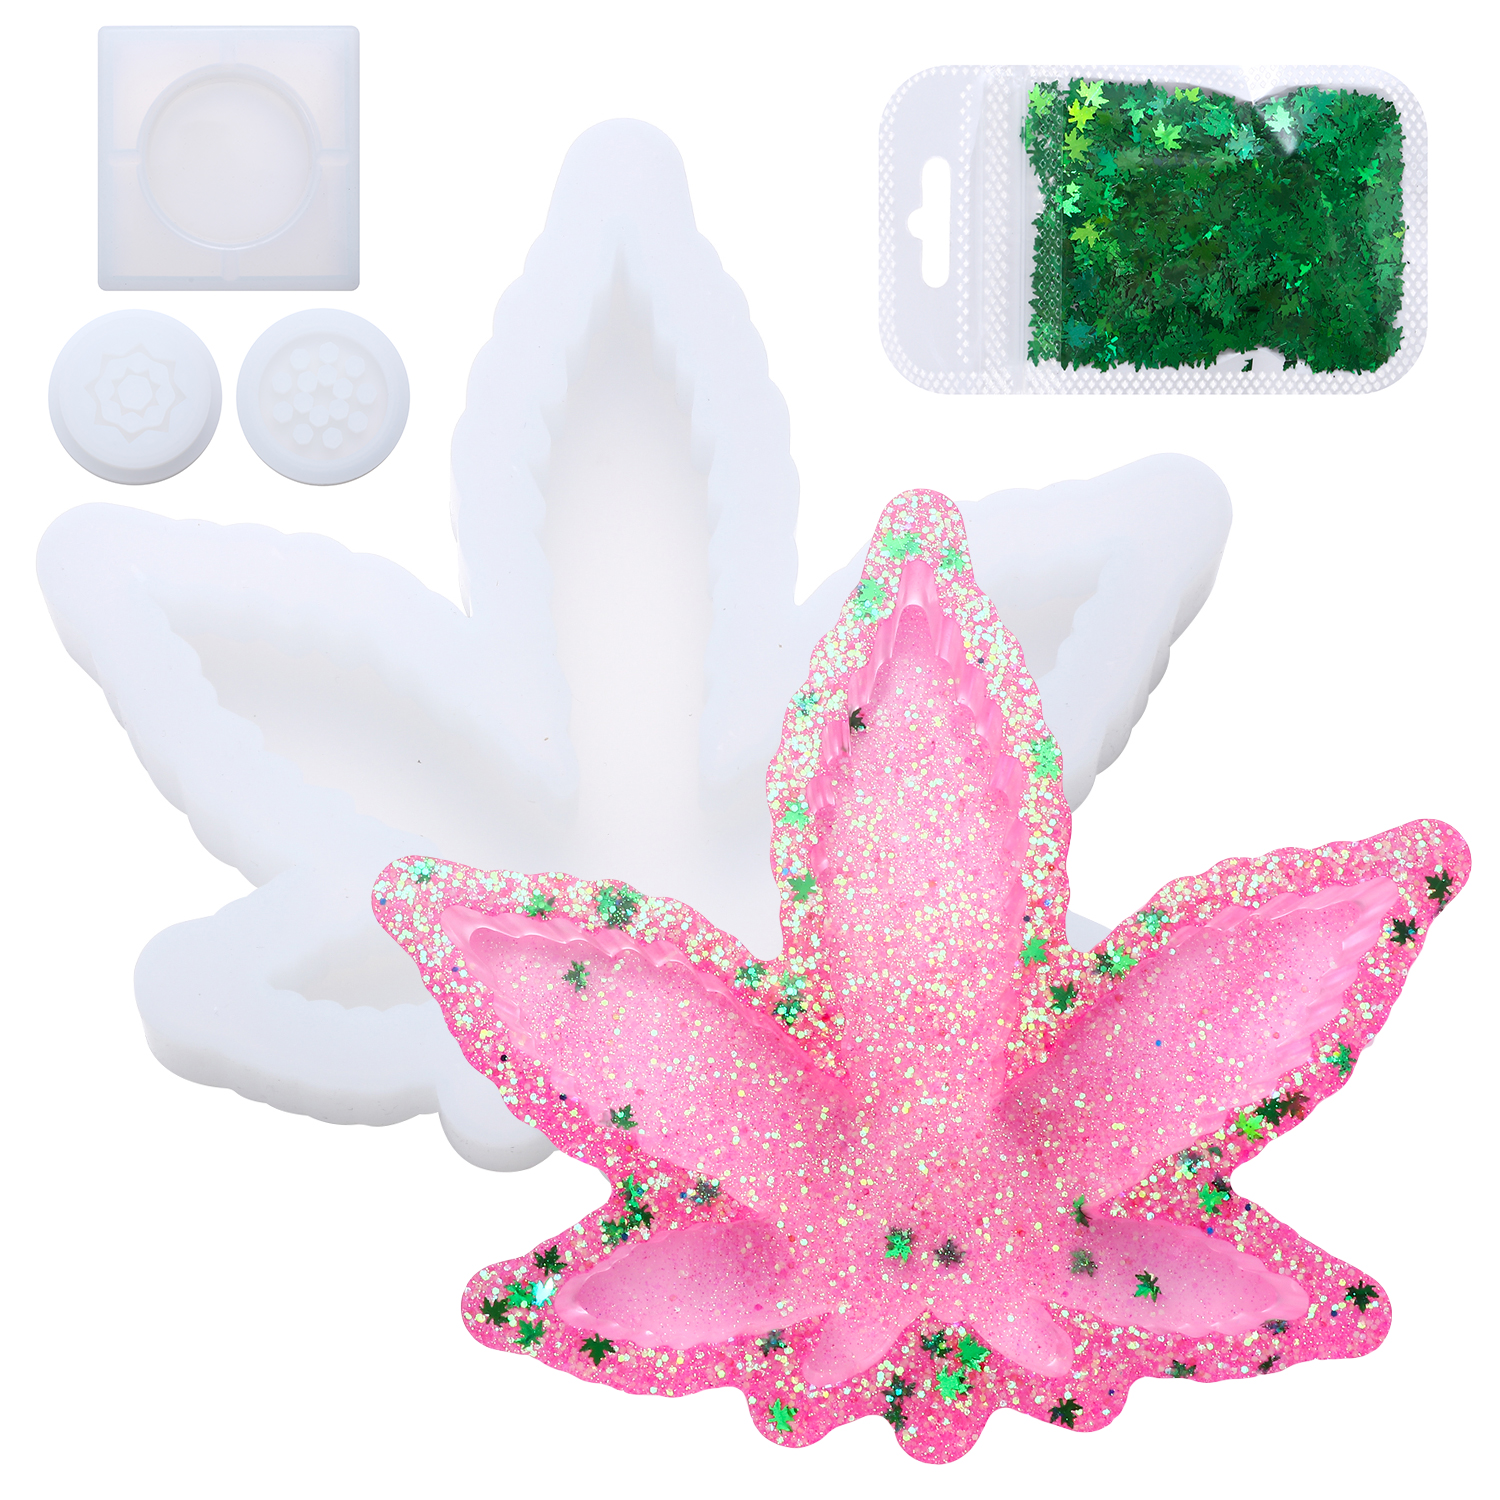 KMPP 1/4Pcs Gift Sets Epoxy Resin Maple Leaf Sequins Small Round Mold Resin Casting Silicone Jewelry Storage Boxes Maple Leaf Resin Mold Leaf Tray